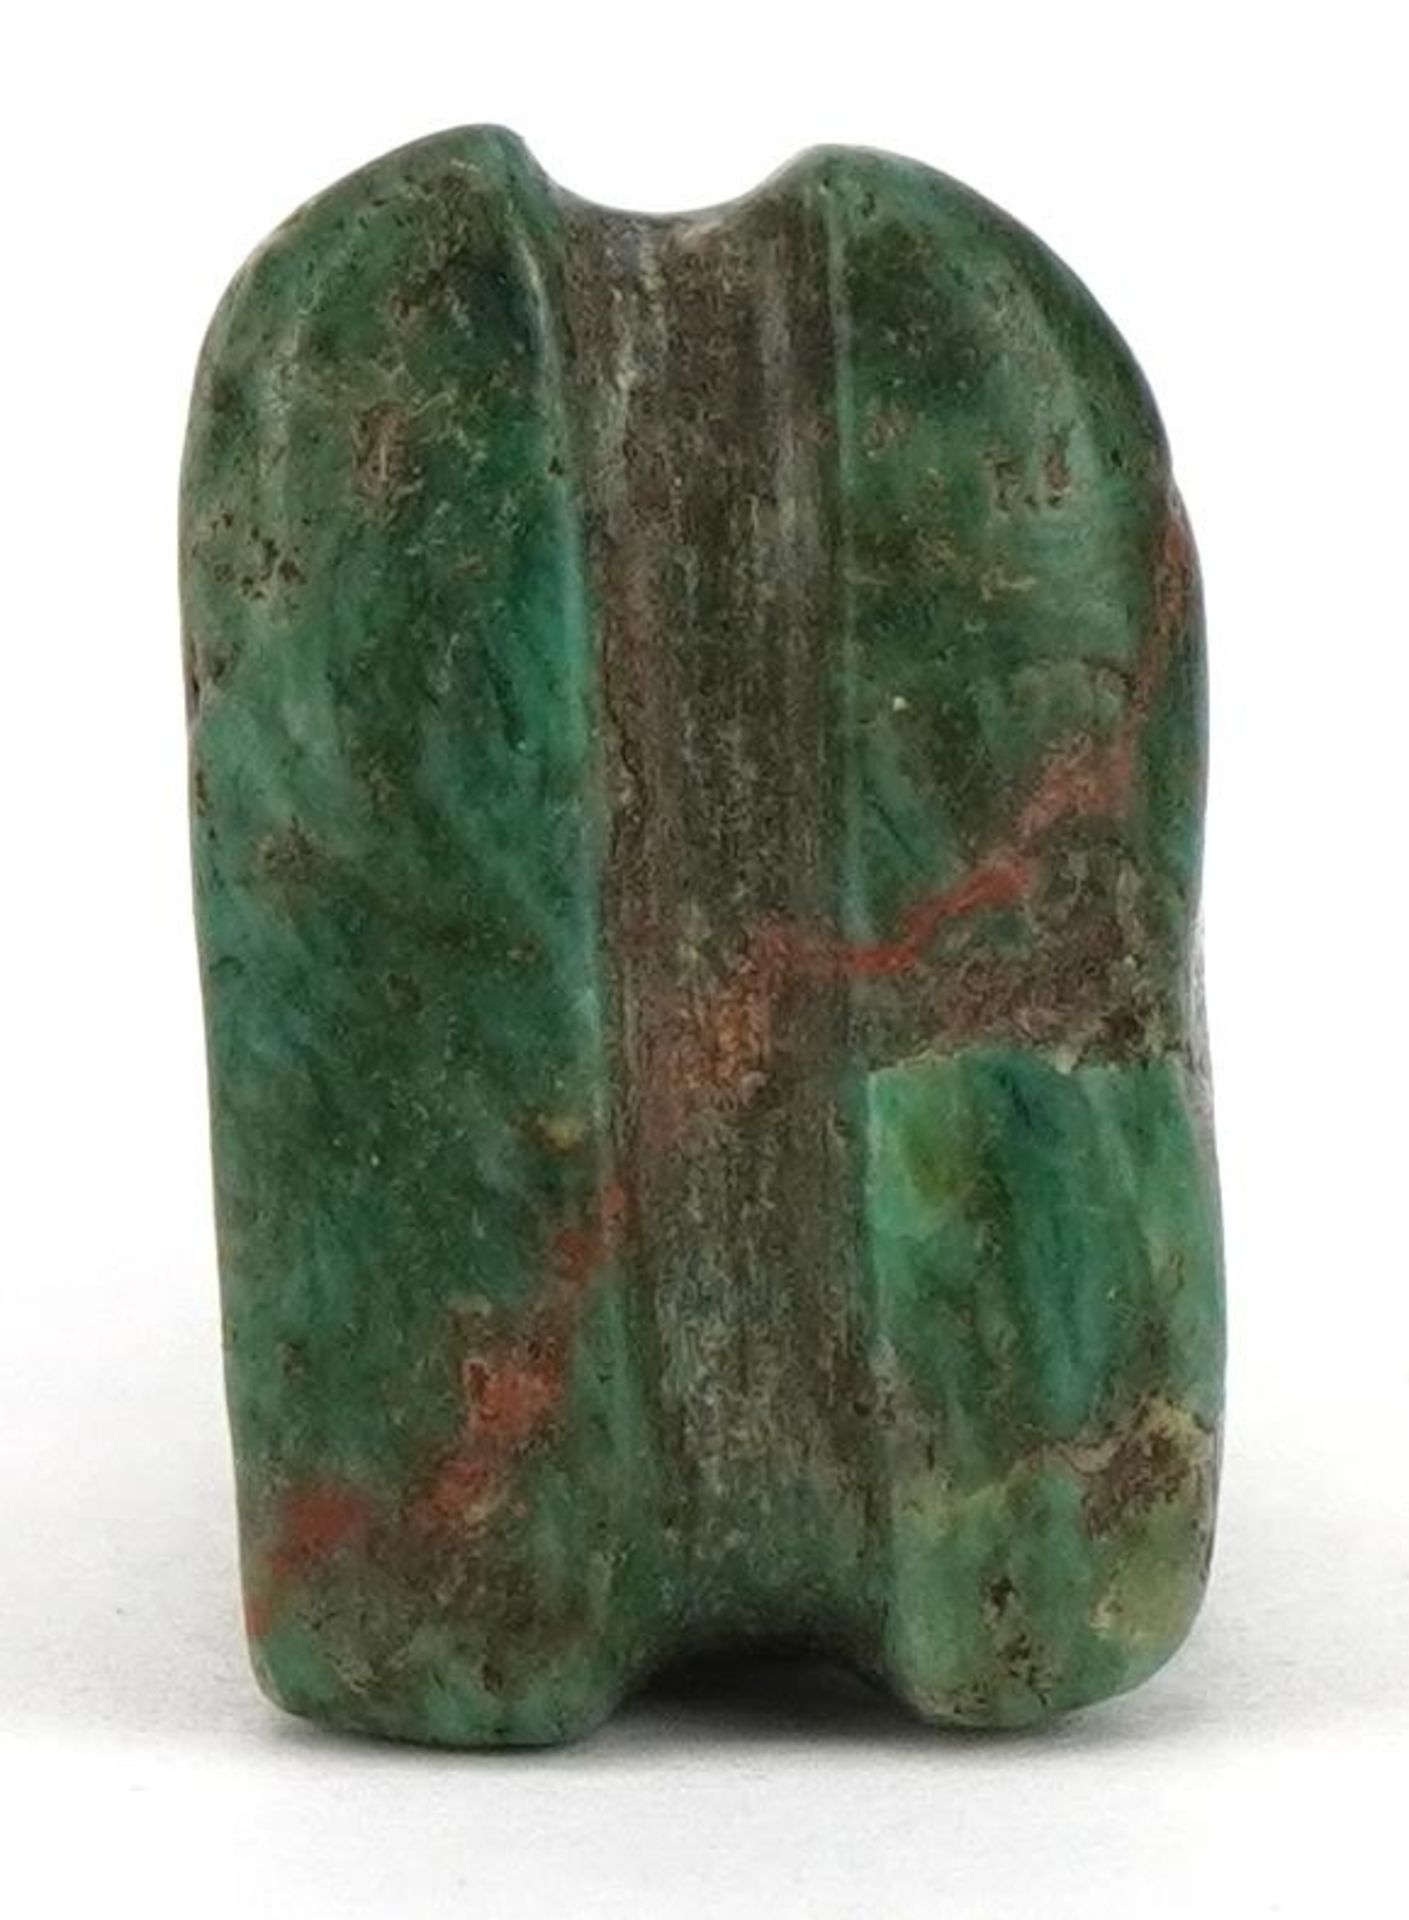 Tribal interest green hardstone figural pendant, probably Mayan or pre Columbian, 4.5cm high : For - Image 7 of 7